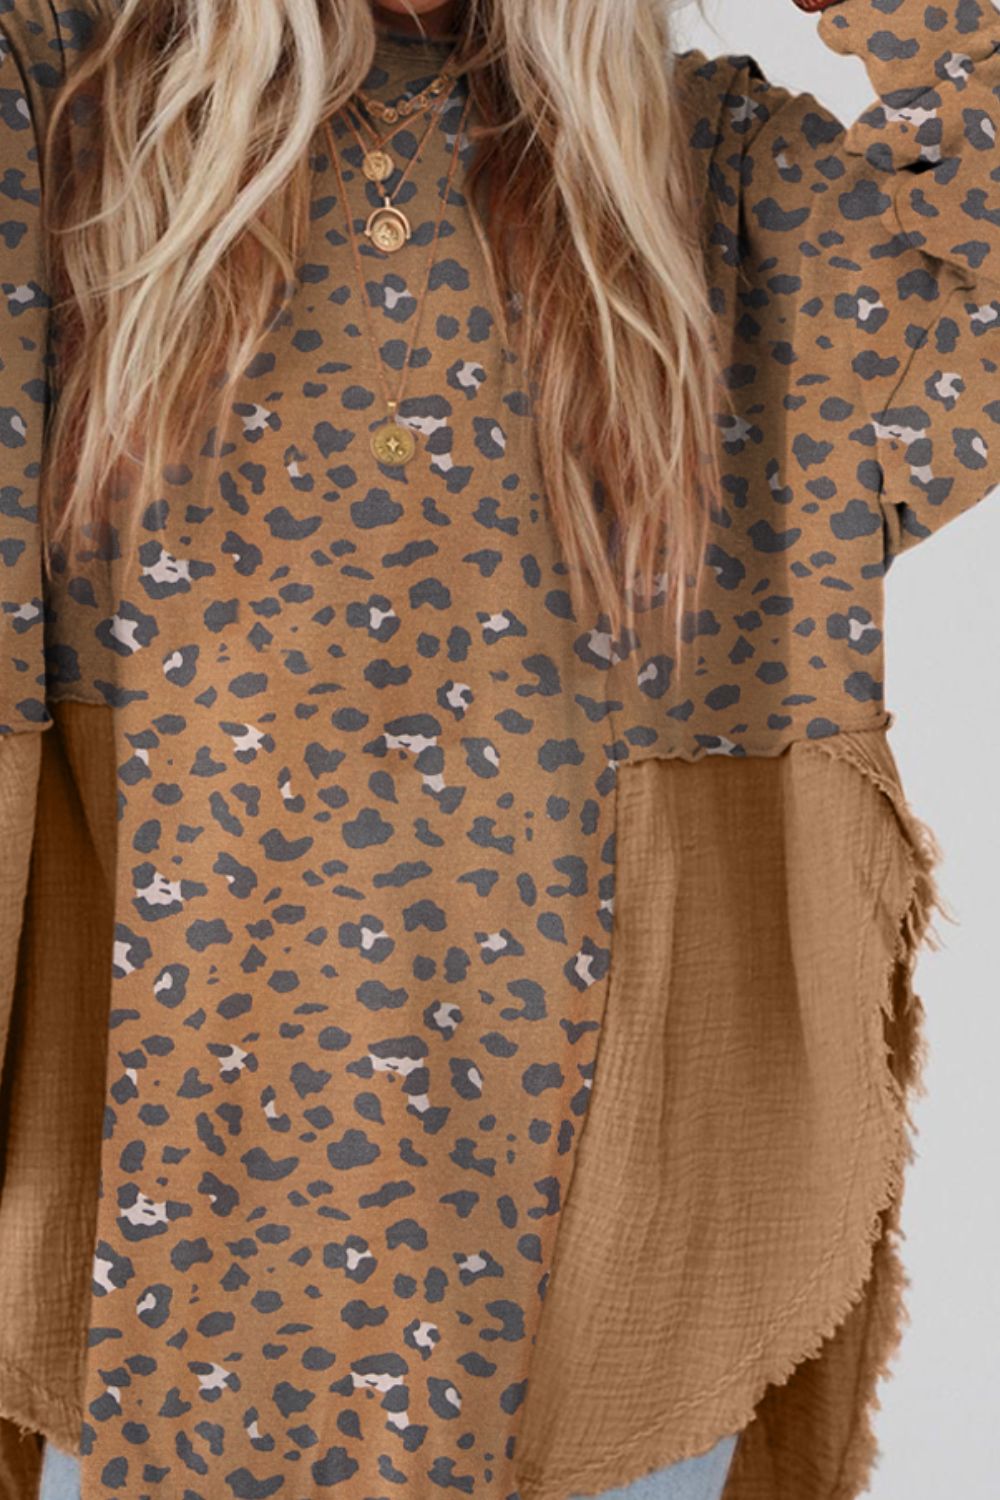 Textured Leopard Dropped Shoulder Blouse - Women’s Clothing & Accessories - Shirts & Tops - 6 - 2024